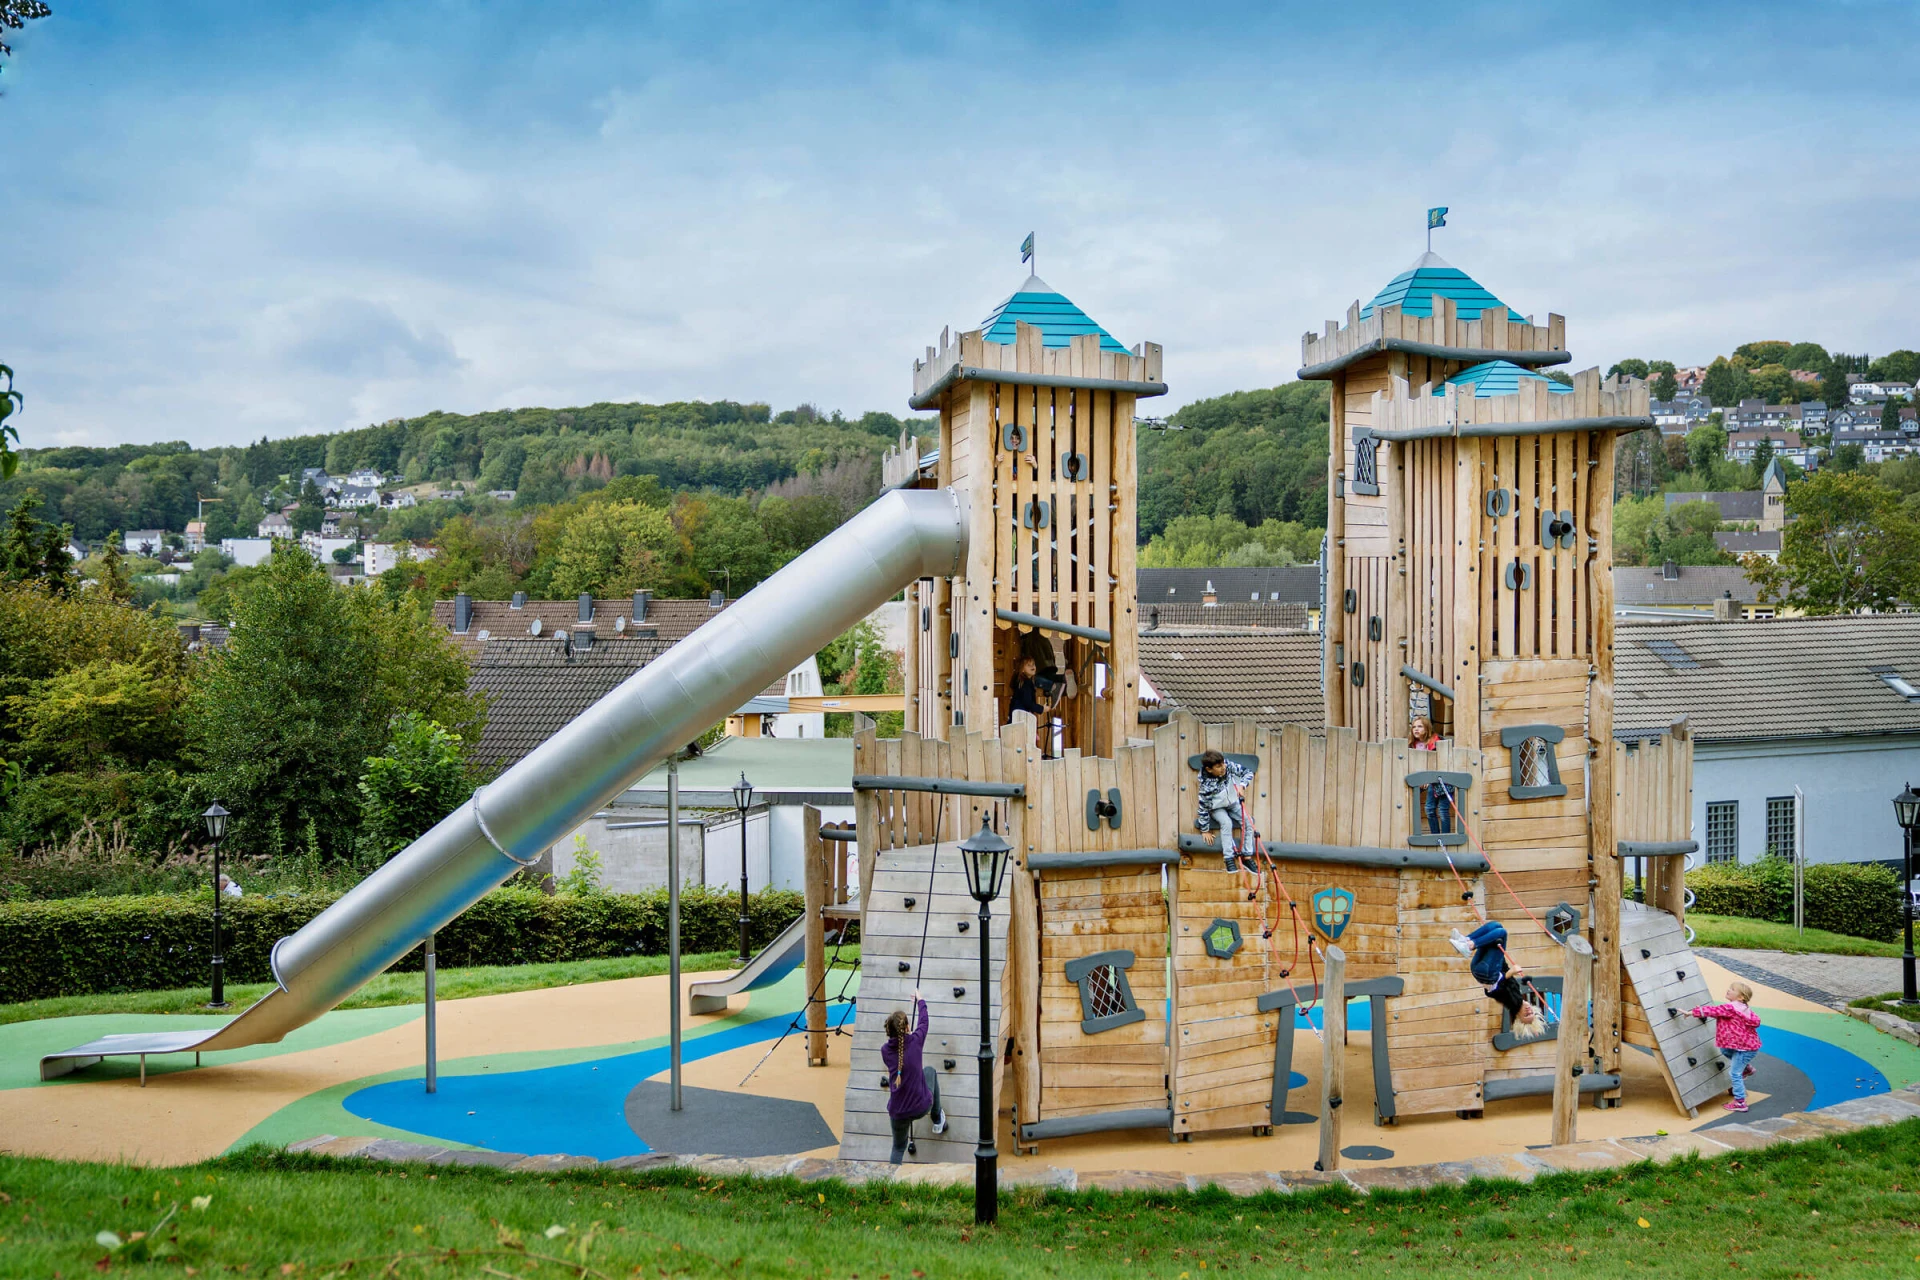 large wooden castle playground with a slide inspiration